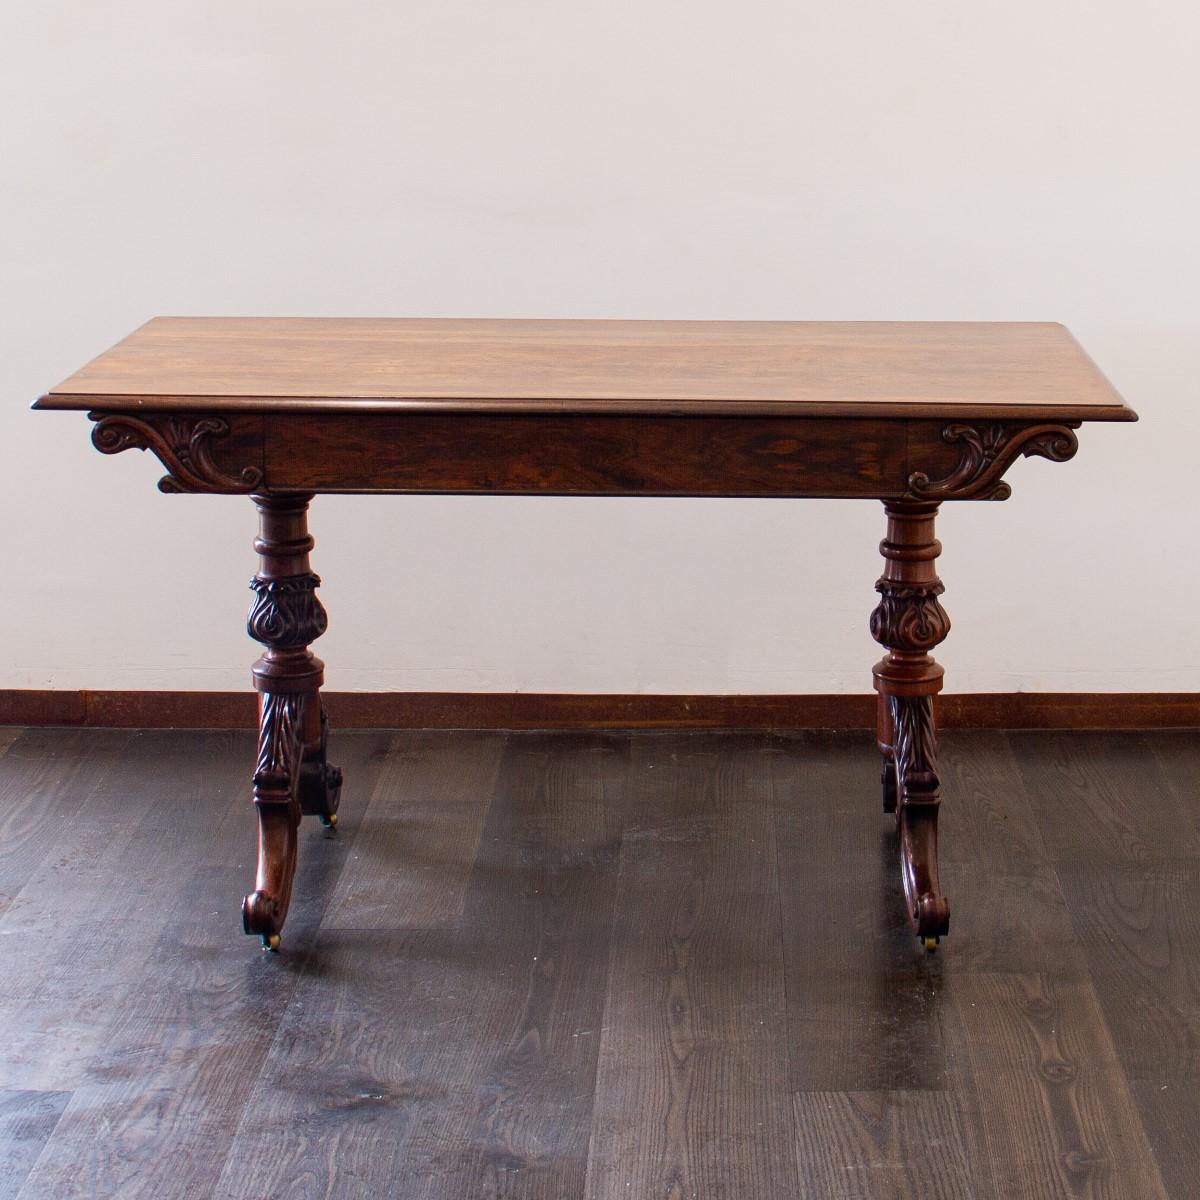 Early 19th century Irish rosewood occasional table which typifies the individual style of Mack Williams and Gibton's furniture, combining superb quality rosewood veneers, supported by a pair of robust acanthus carved legs together with a single